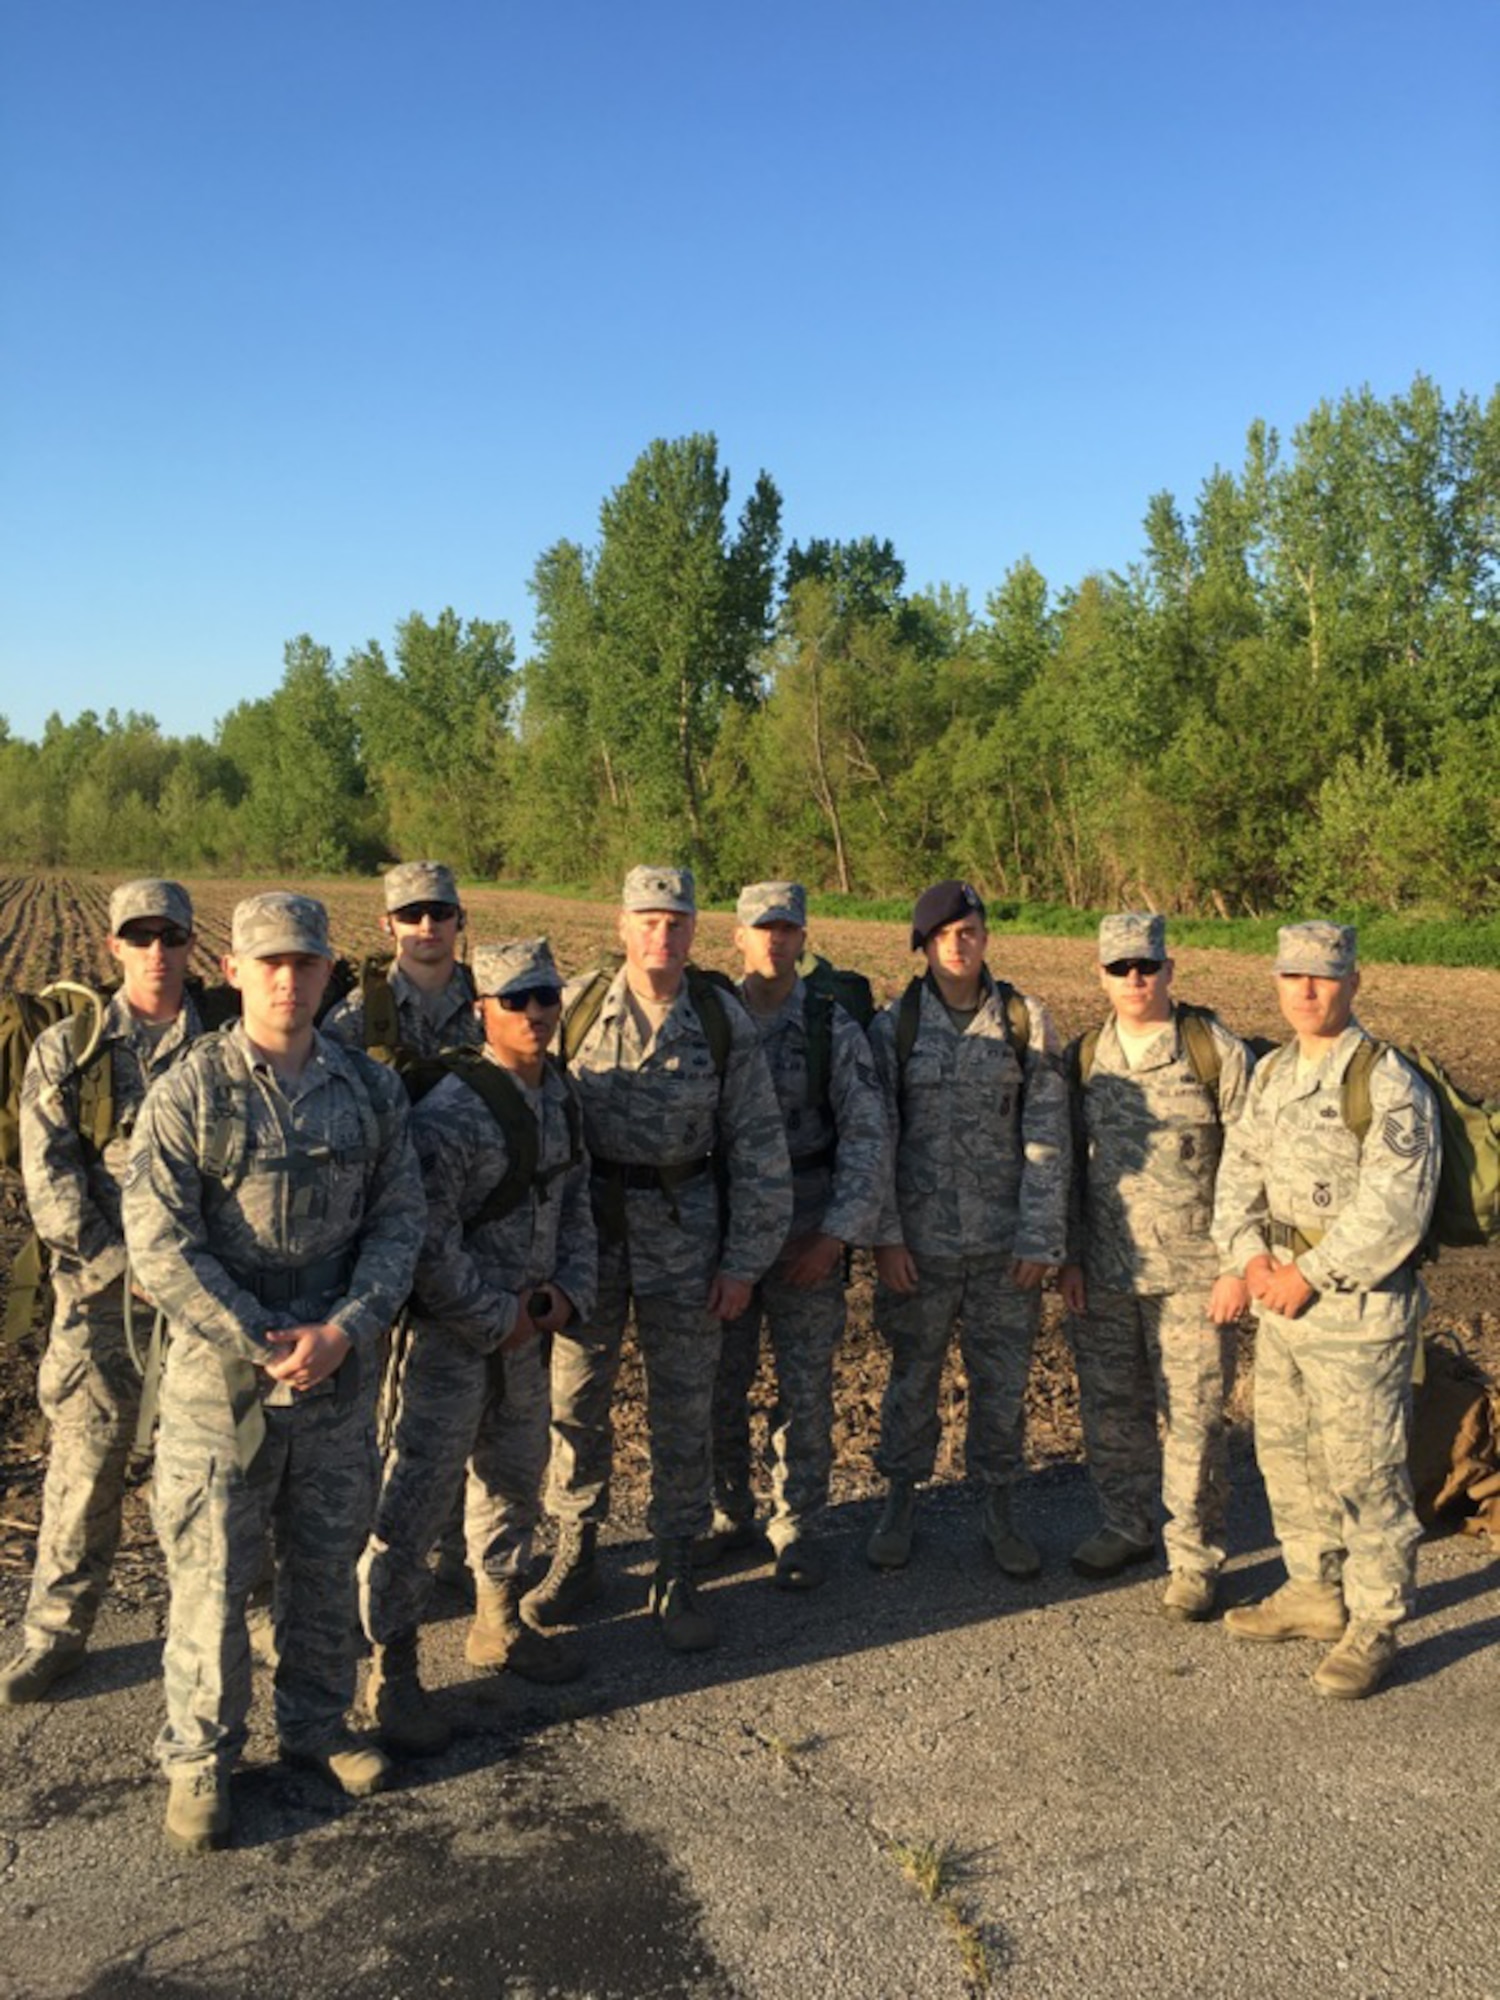 Members of the 130th Airlift Wing Security Forces Squadron pose for a picture after completing the German Armed Forces Proficiency Badge (GAFPB) course, May 5, 2017, at Rosecrans Air National Guard Base, St. Joseph, Missouri. The GAFPB a decoration of the Bundeswehr, the Armed Forces of the Federal Republic of Germany. As one of the few foreign badges that are authorized to be worn on the U.S. military uniform, the GAFPB is one of the most highly sought-after awards. Nine defenders with the 130th AW earned the award after completing the rigorous course. (courtesy photo)